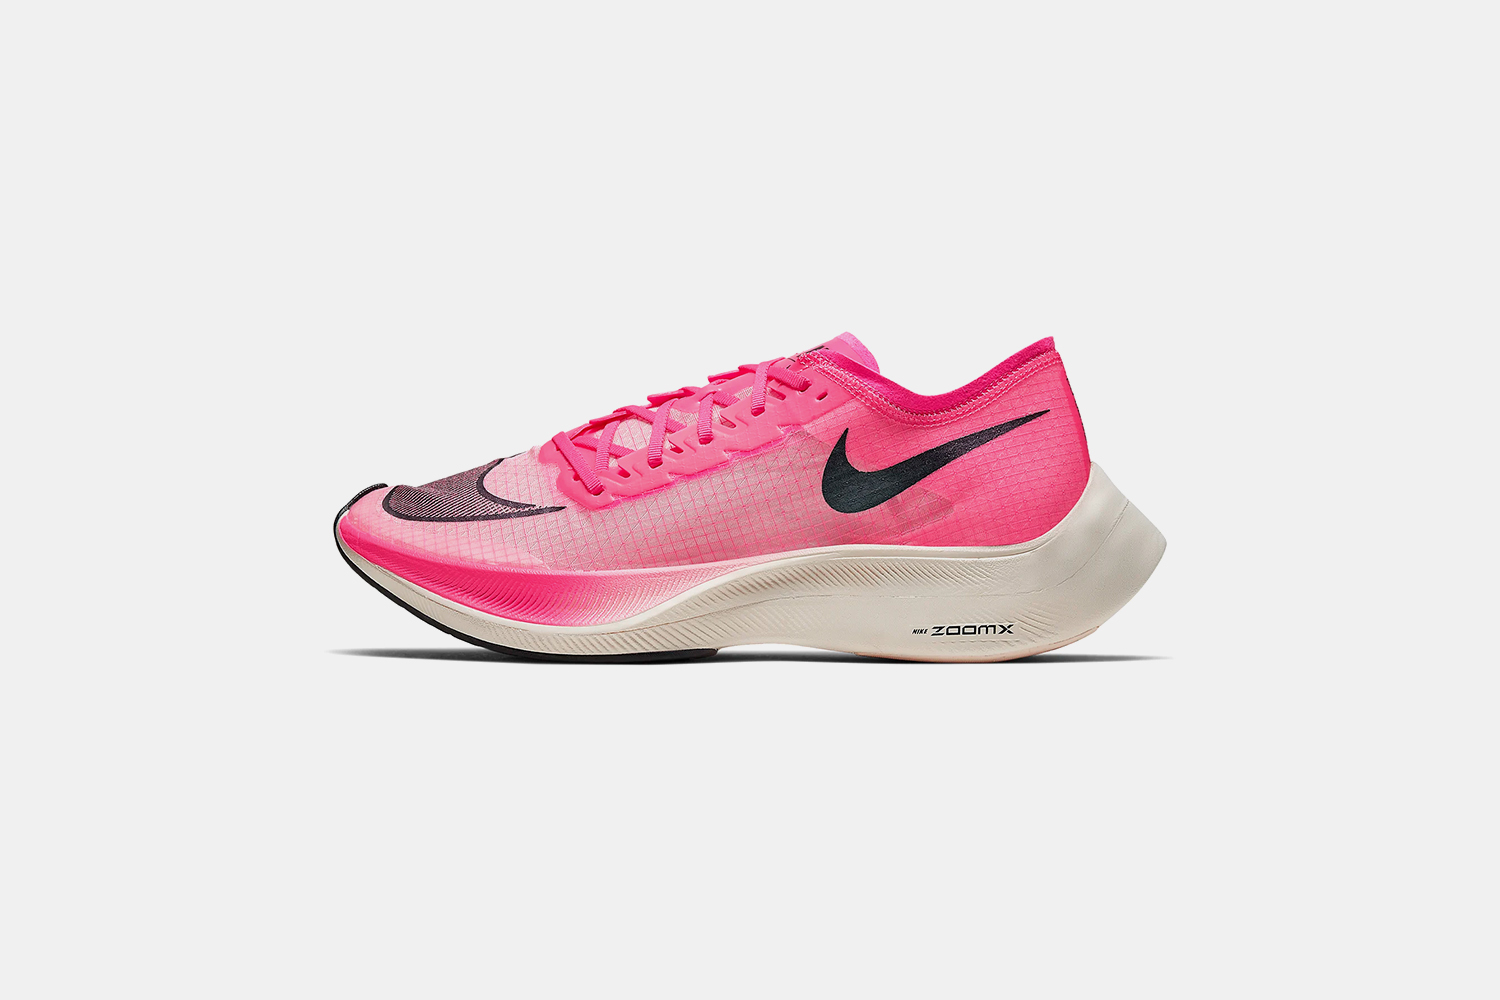 vaporfly controversy